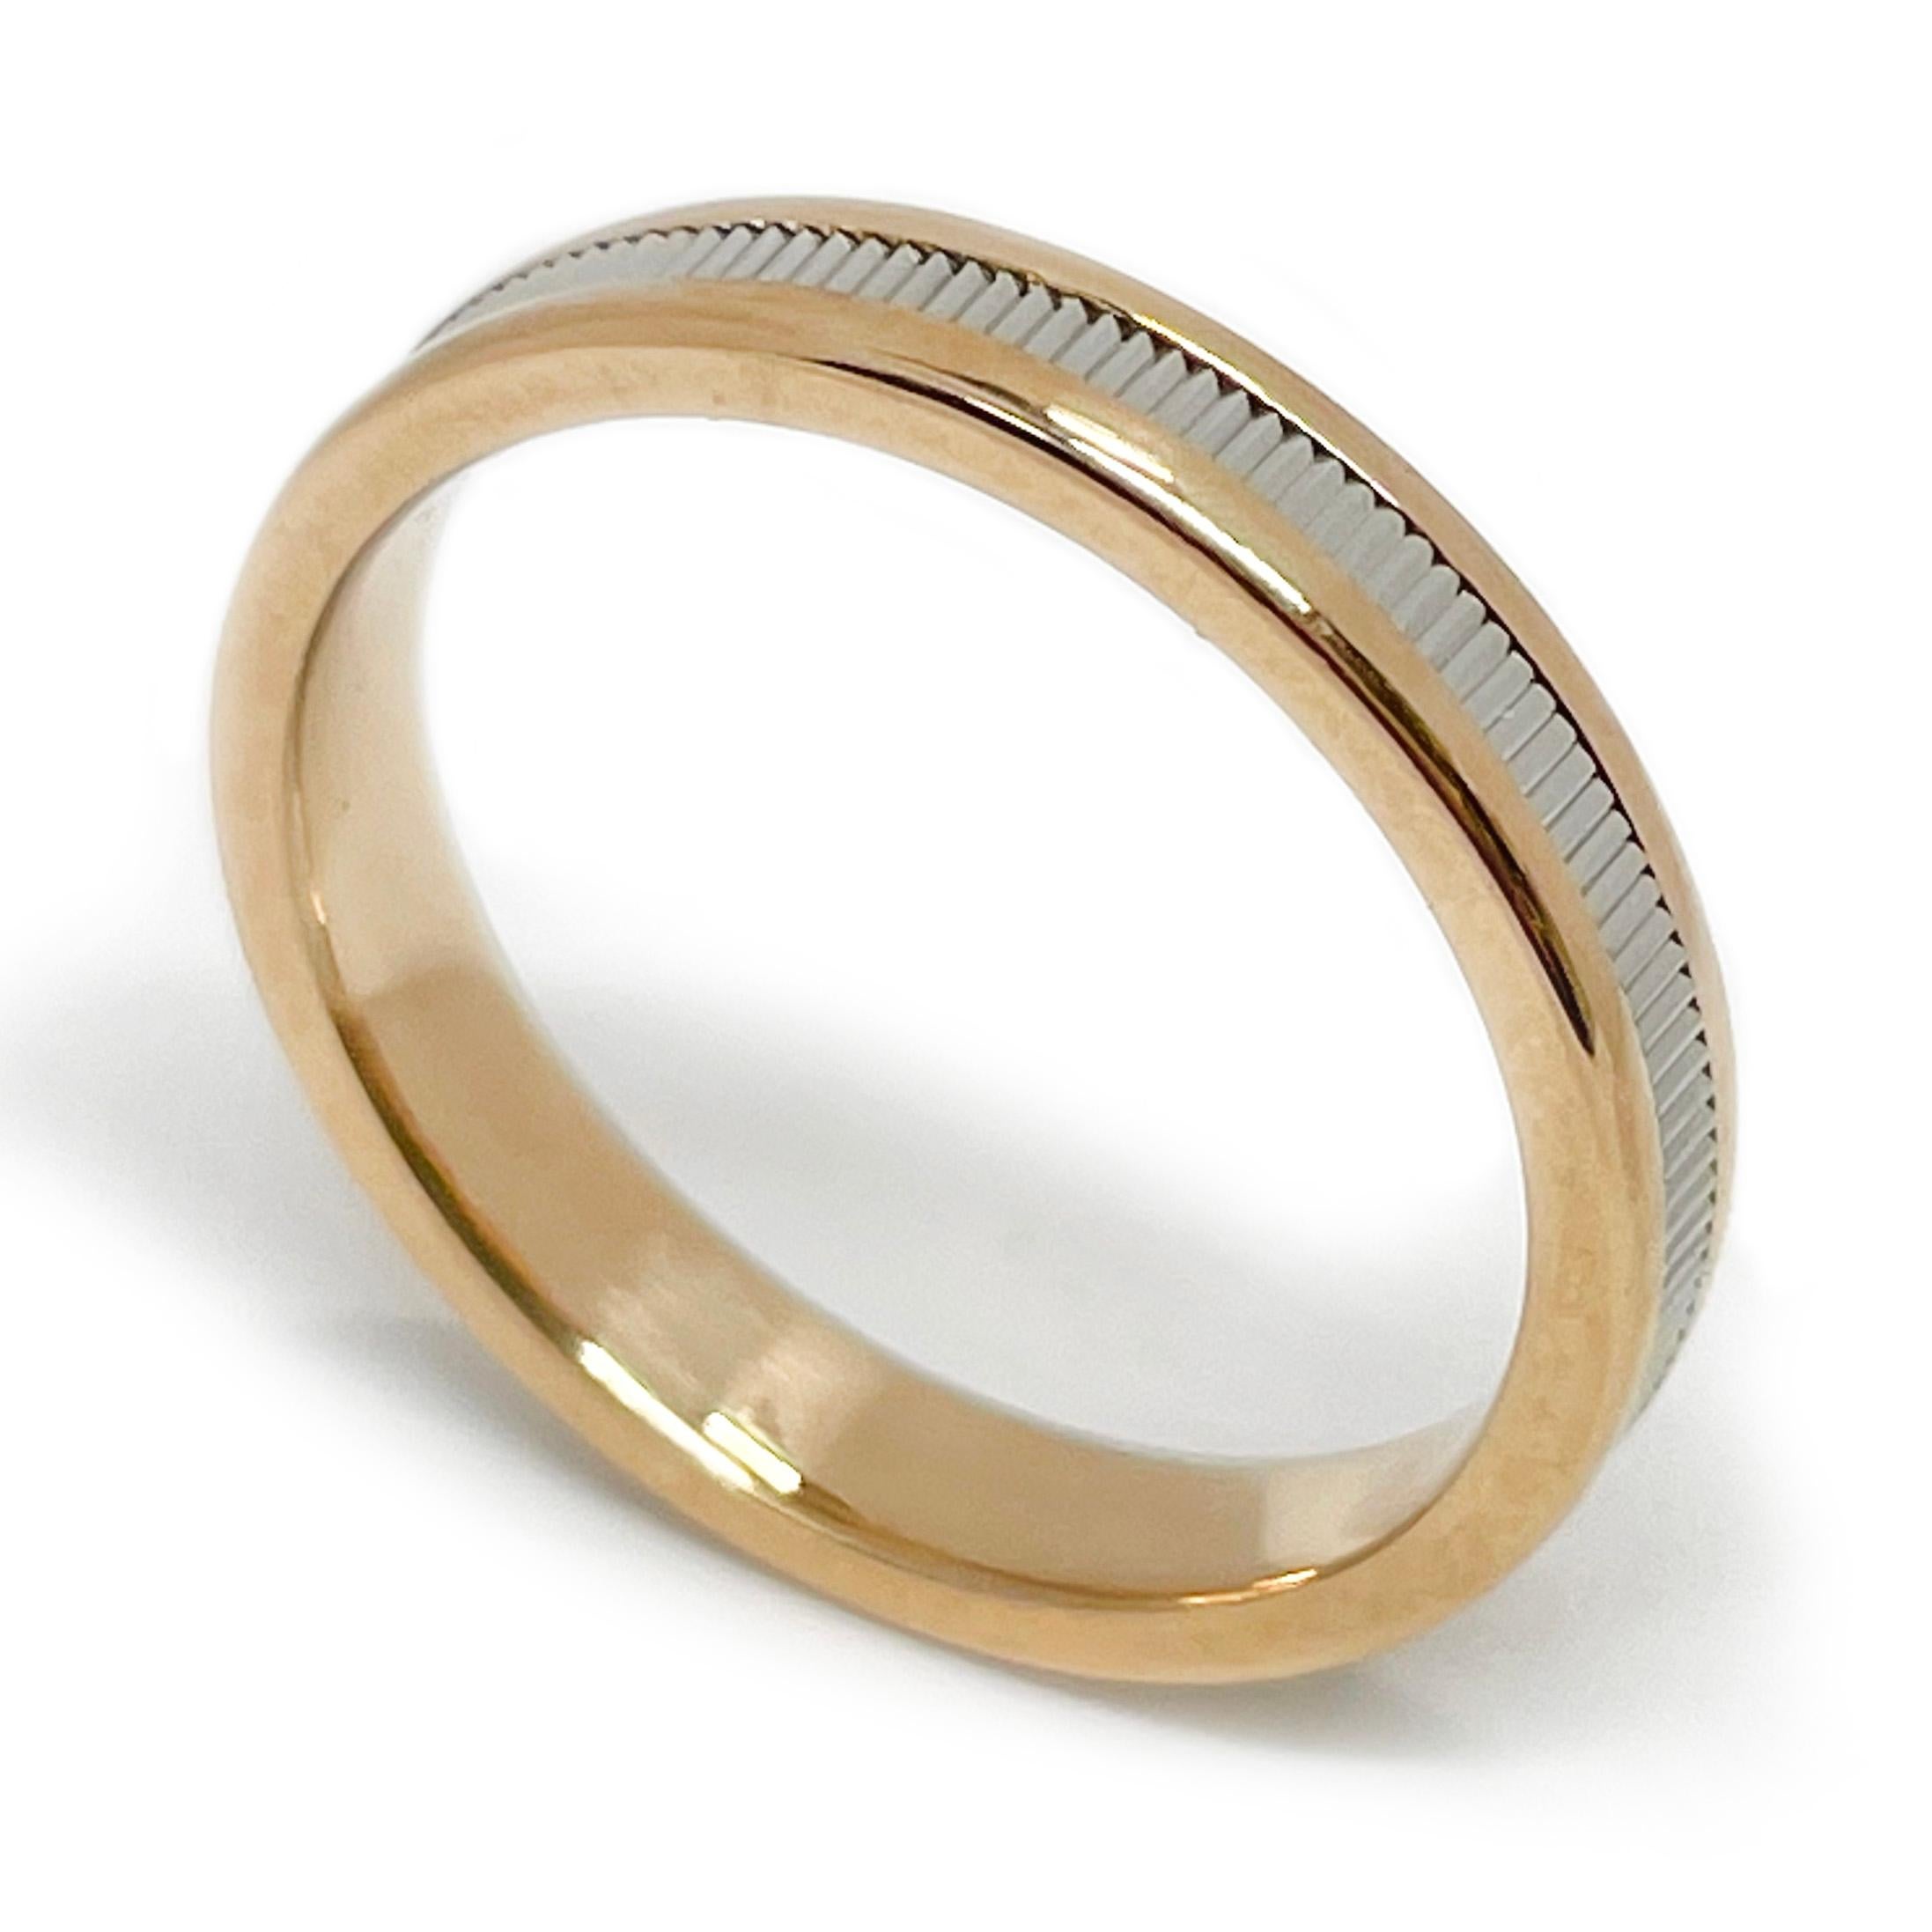 14 Karat Two-Tone Rose Gold Ring Band. The ring features a rose gold base with a smooth shiny finish and a fluted white gold center for added sparkle. Stamped on the inside of the 3.3mm wide band is a designer hallmark, an N inside a heart with an